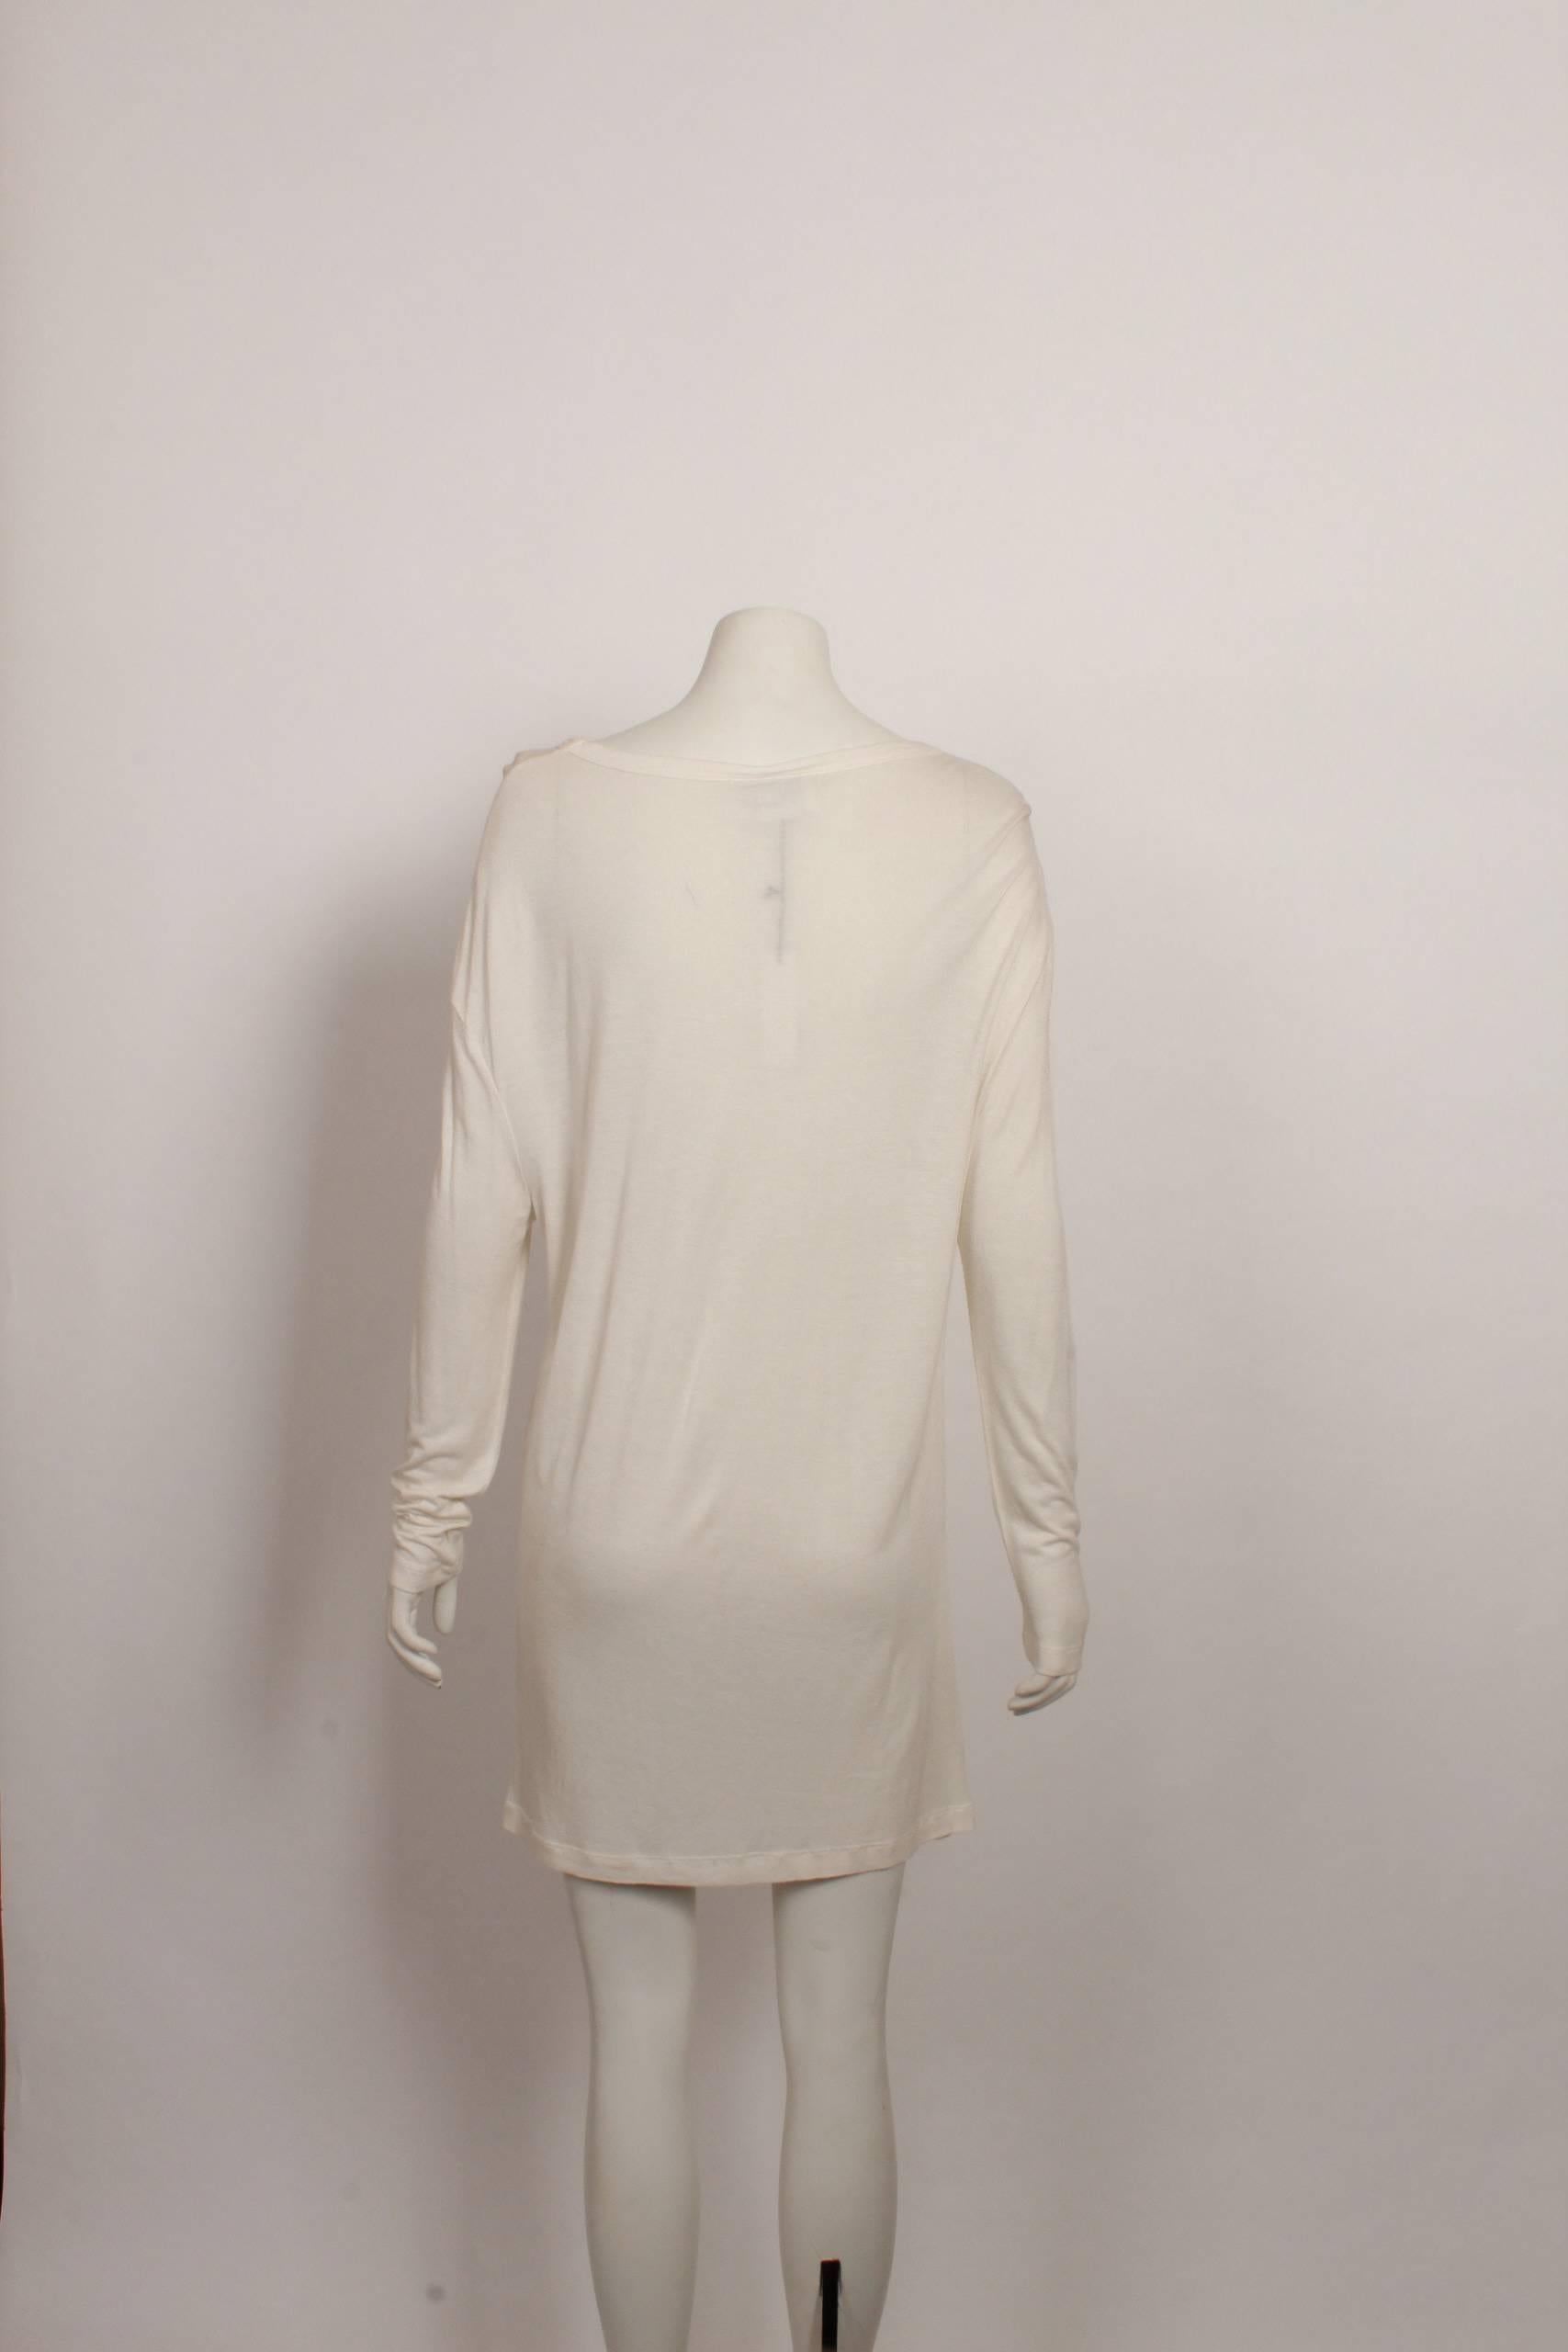 Margiela Shirt Dress In Fair Condition For Sale In Melbourne, Victoria